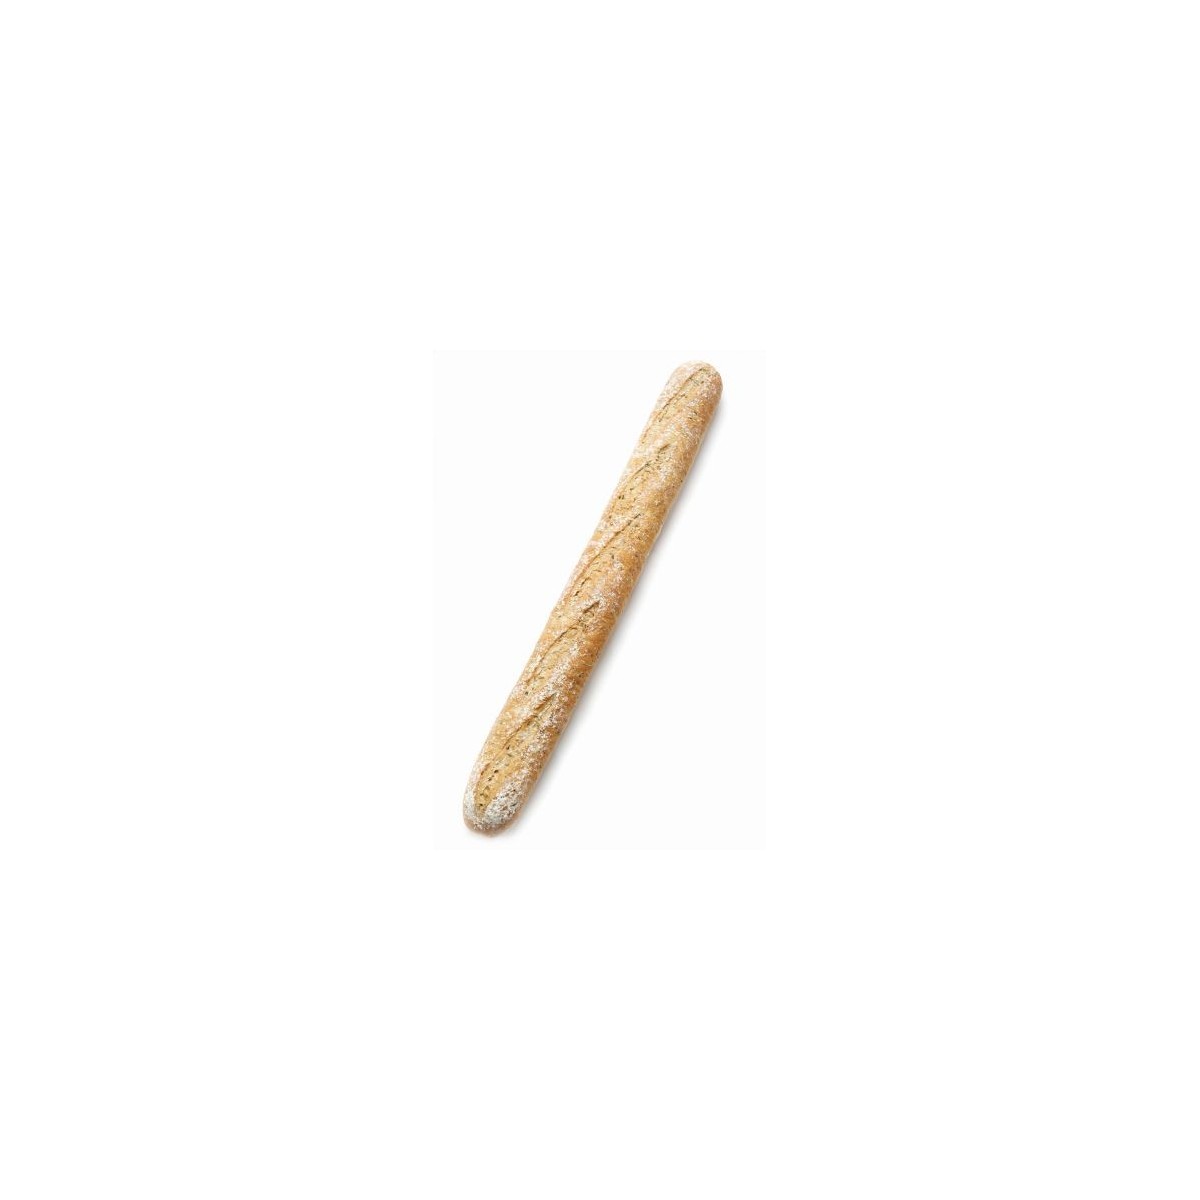 DELIFRANCE S4489 BAGUETTE HEART OF SEEDS 58CM READY TO BAKE 40X300GR  BOX 